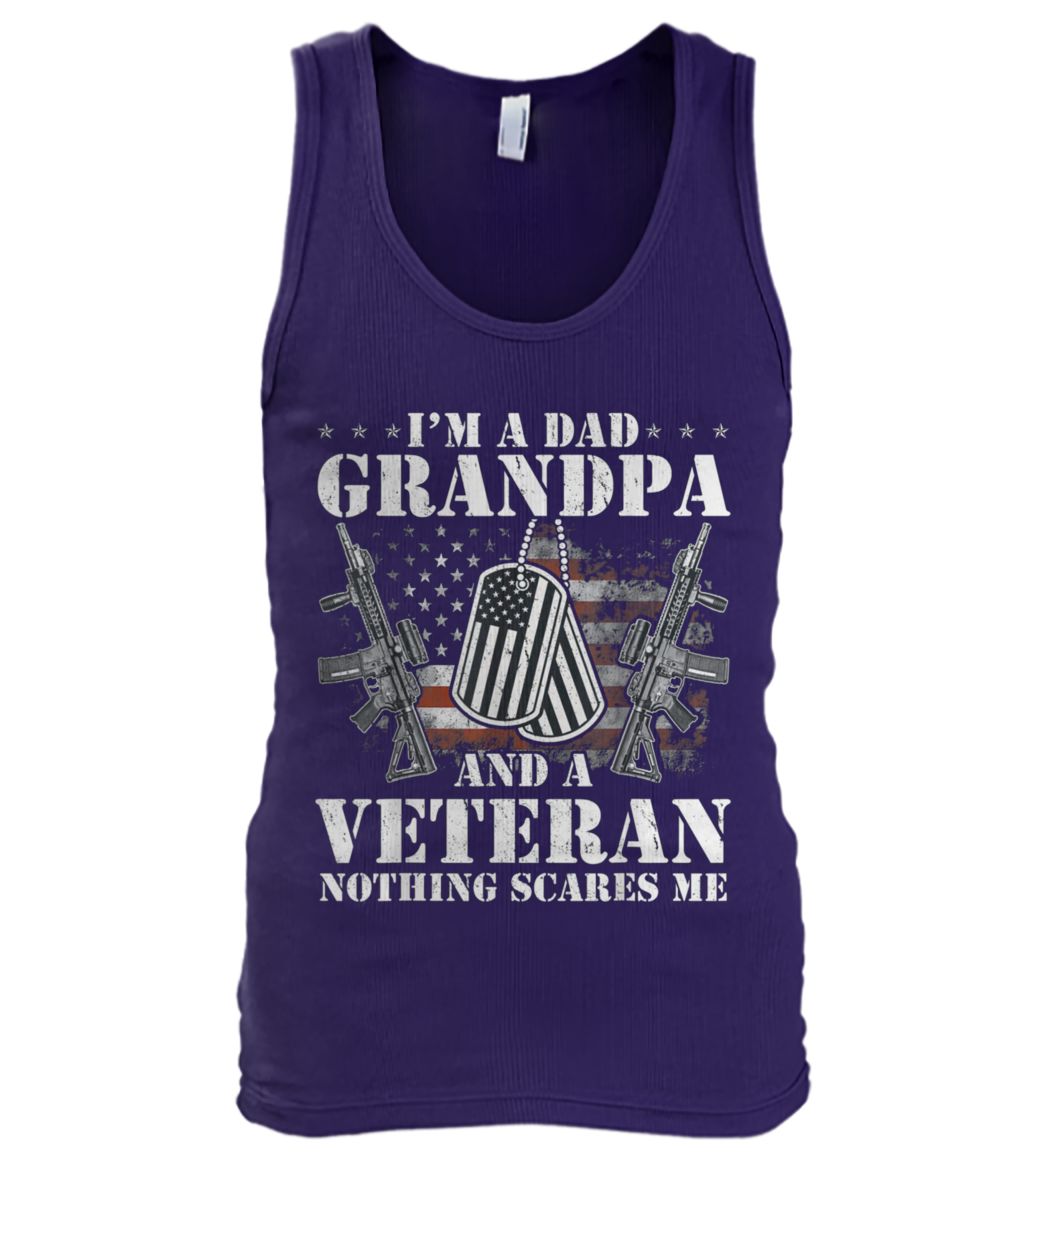 I'm a dad grandpa and a veteran nothing scares me men's tank top